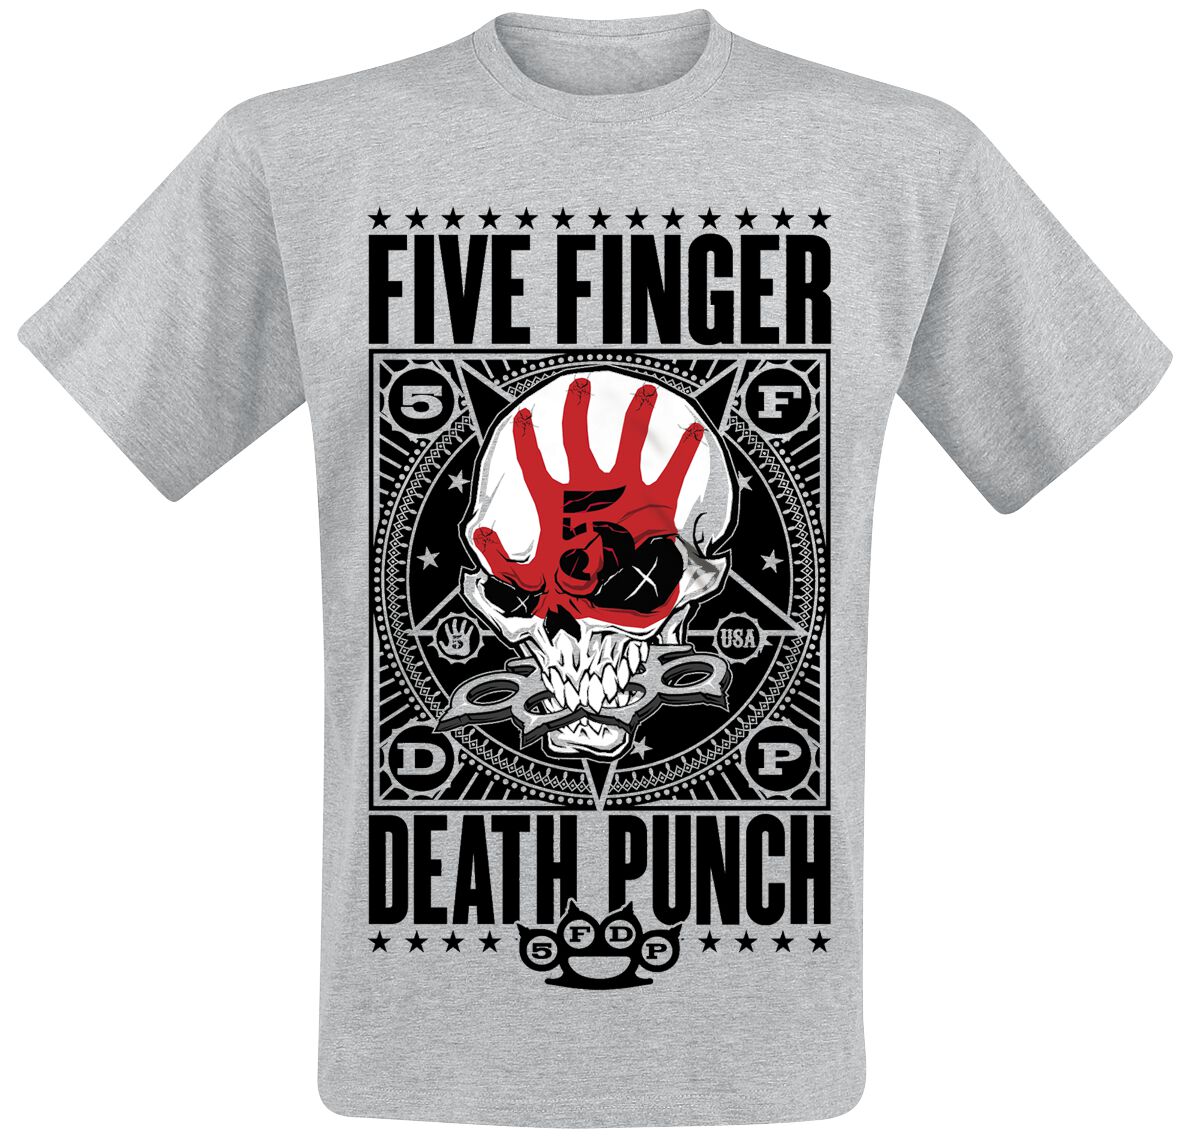 Image of T-Shirt di Five Finger Death Punch - Punchagram - S a XXL - Uomo - grigio sport